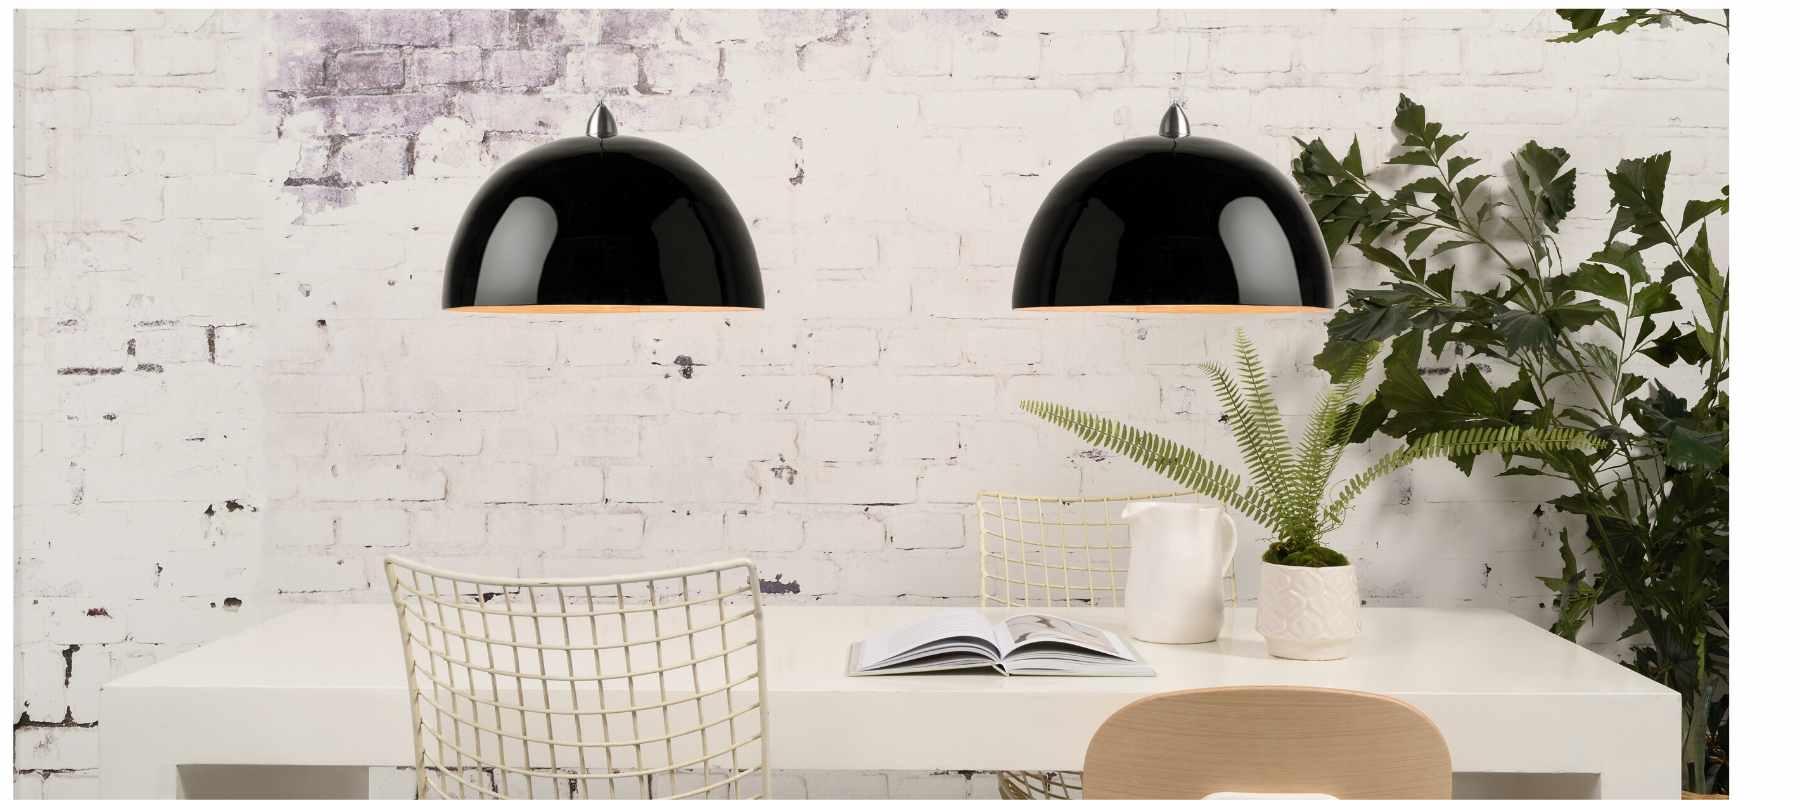 Black double pendant lighting with white exposed brick wall